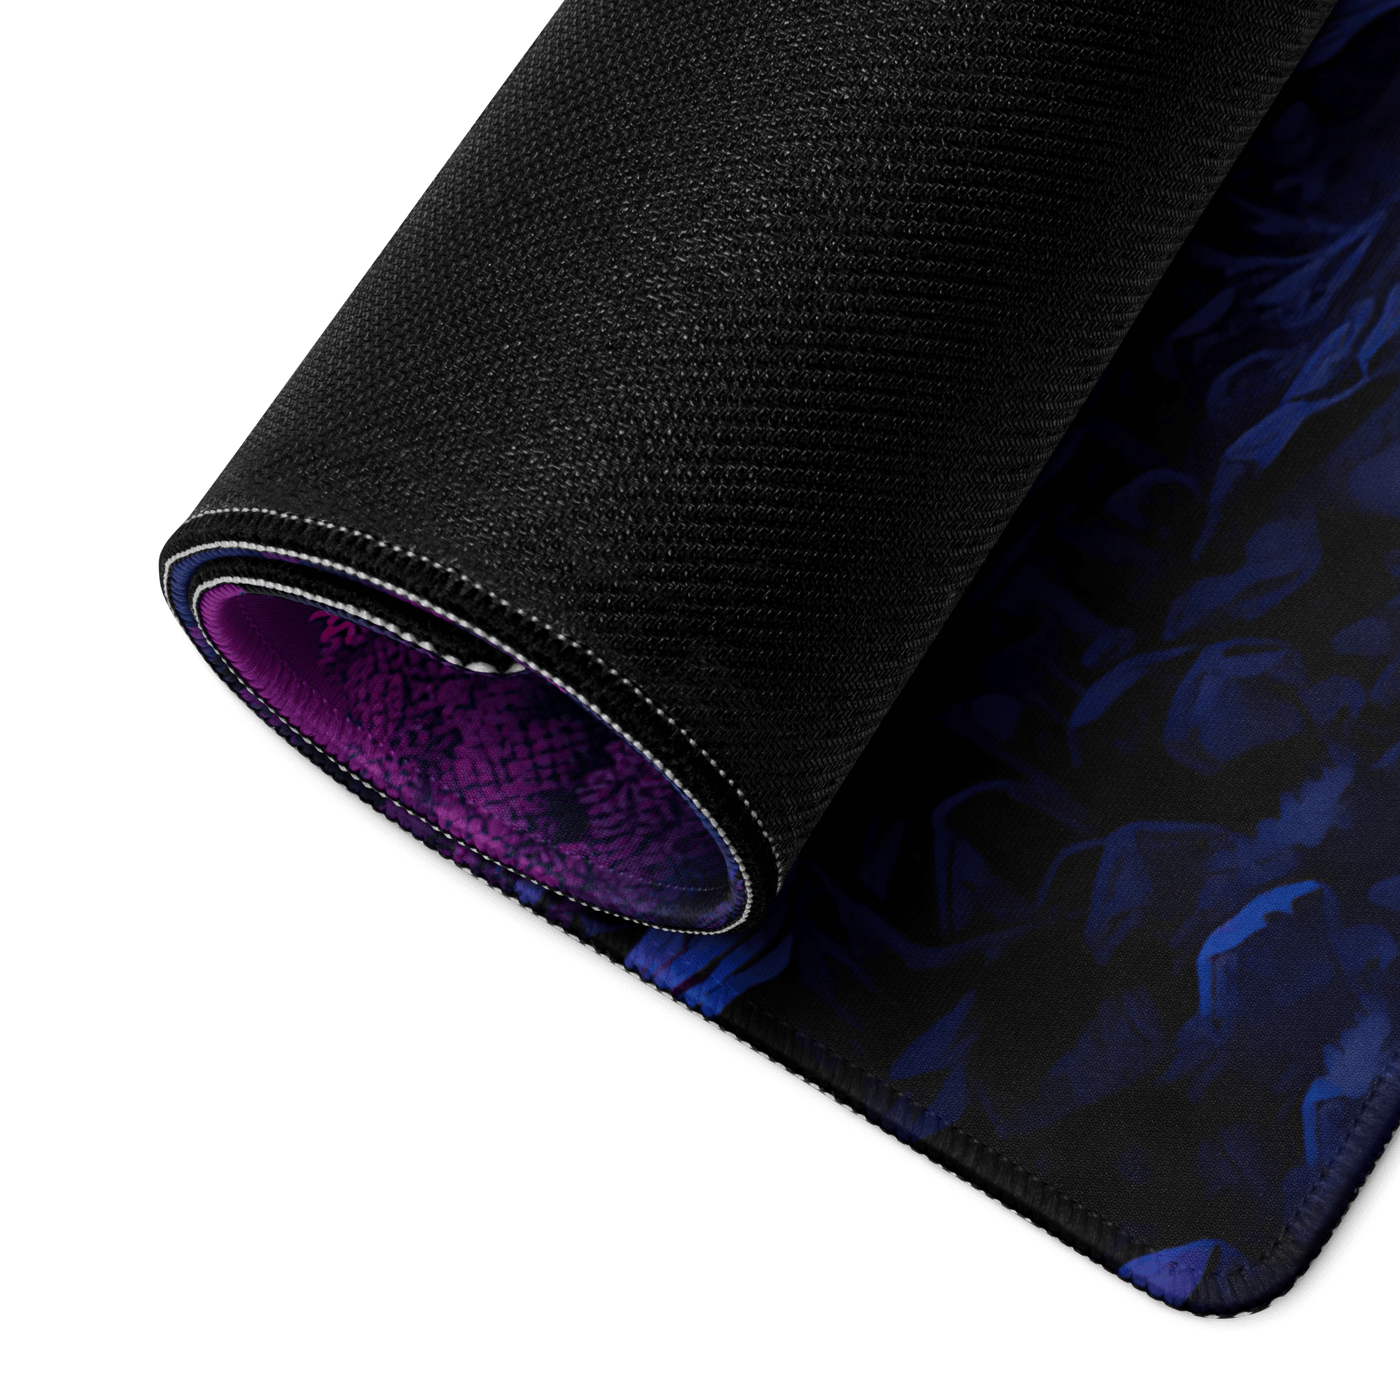 Premium Gaming Mouse Pad | Purple Stream in a Dark Forest